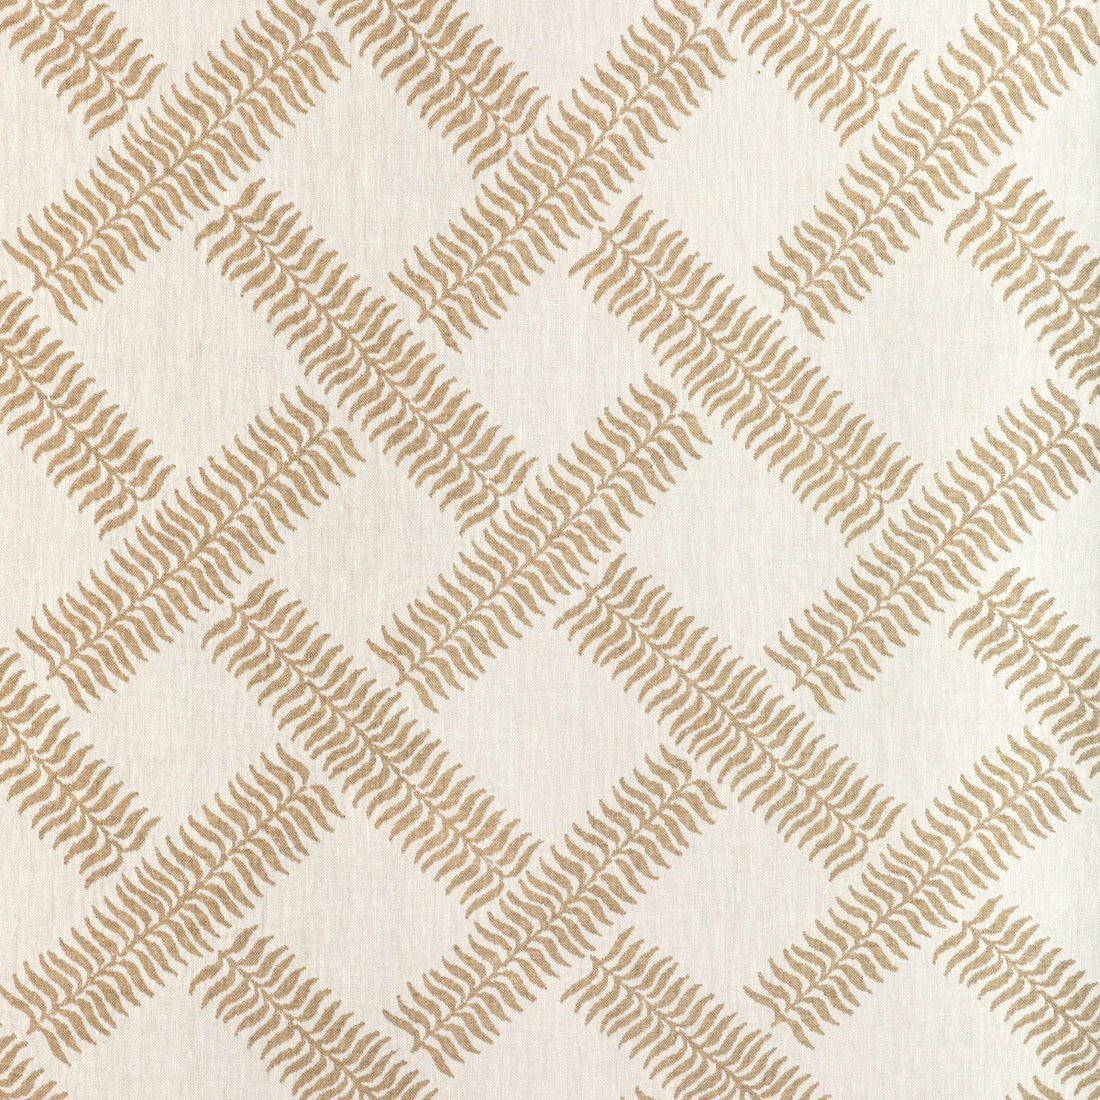 Garden Trellis Weave fabric in sand color - pattern 2022105.16.0 - by Lee Jofa in the Sarah Bartholomew collection